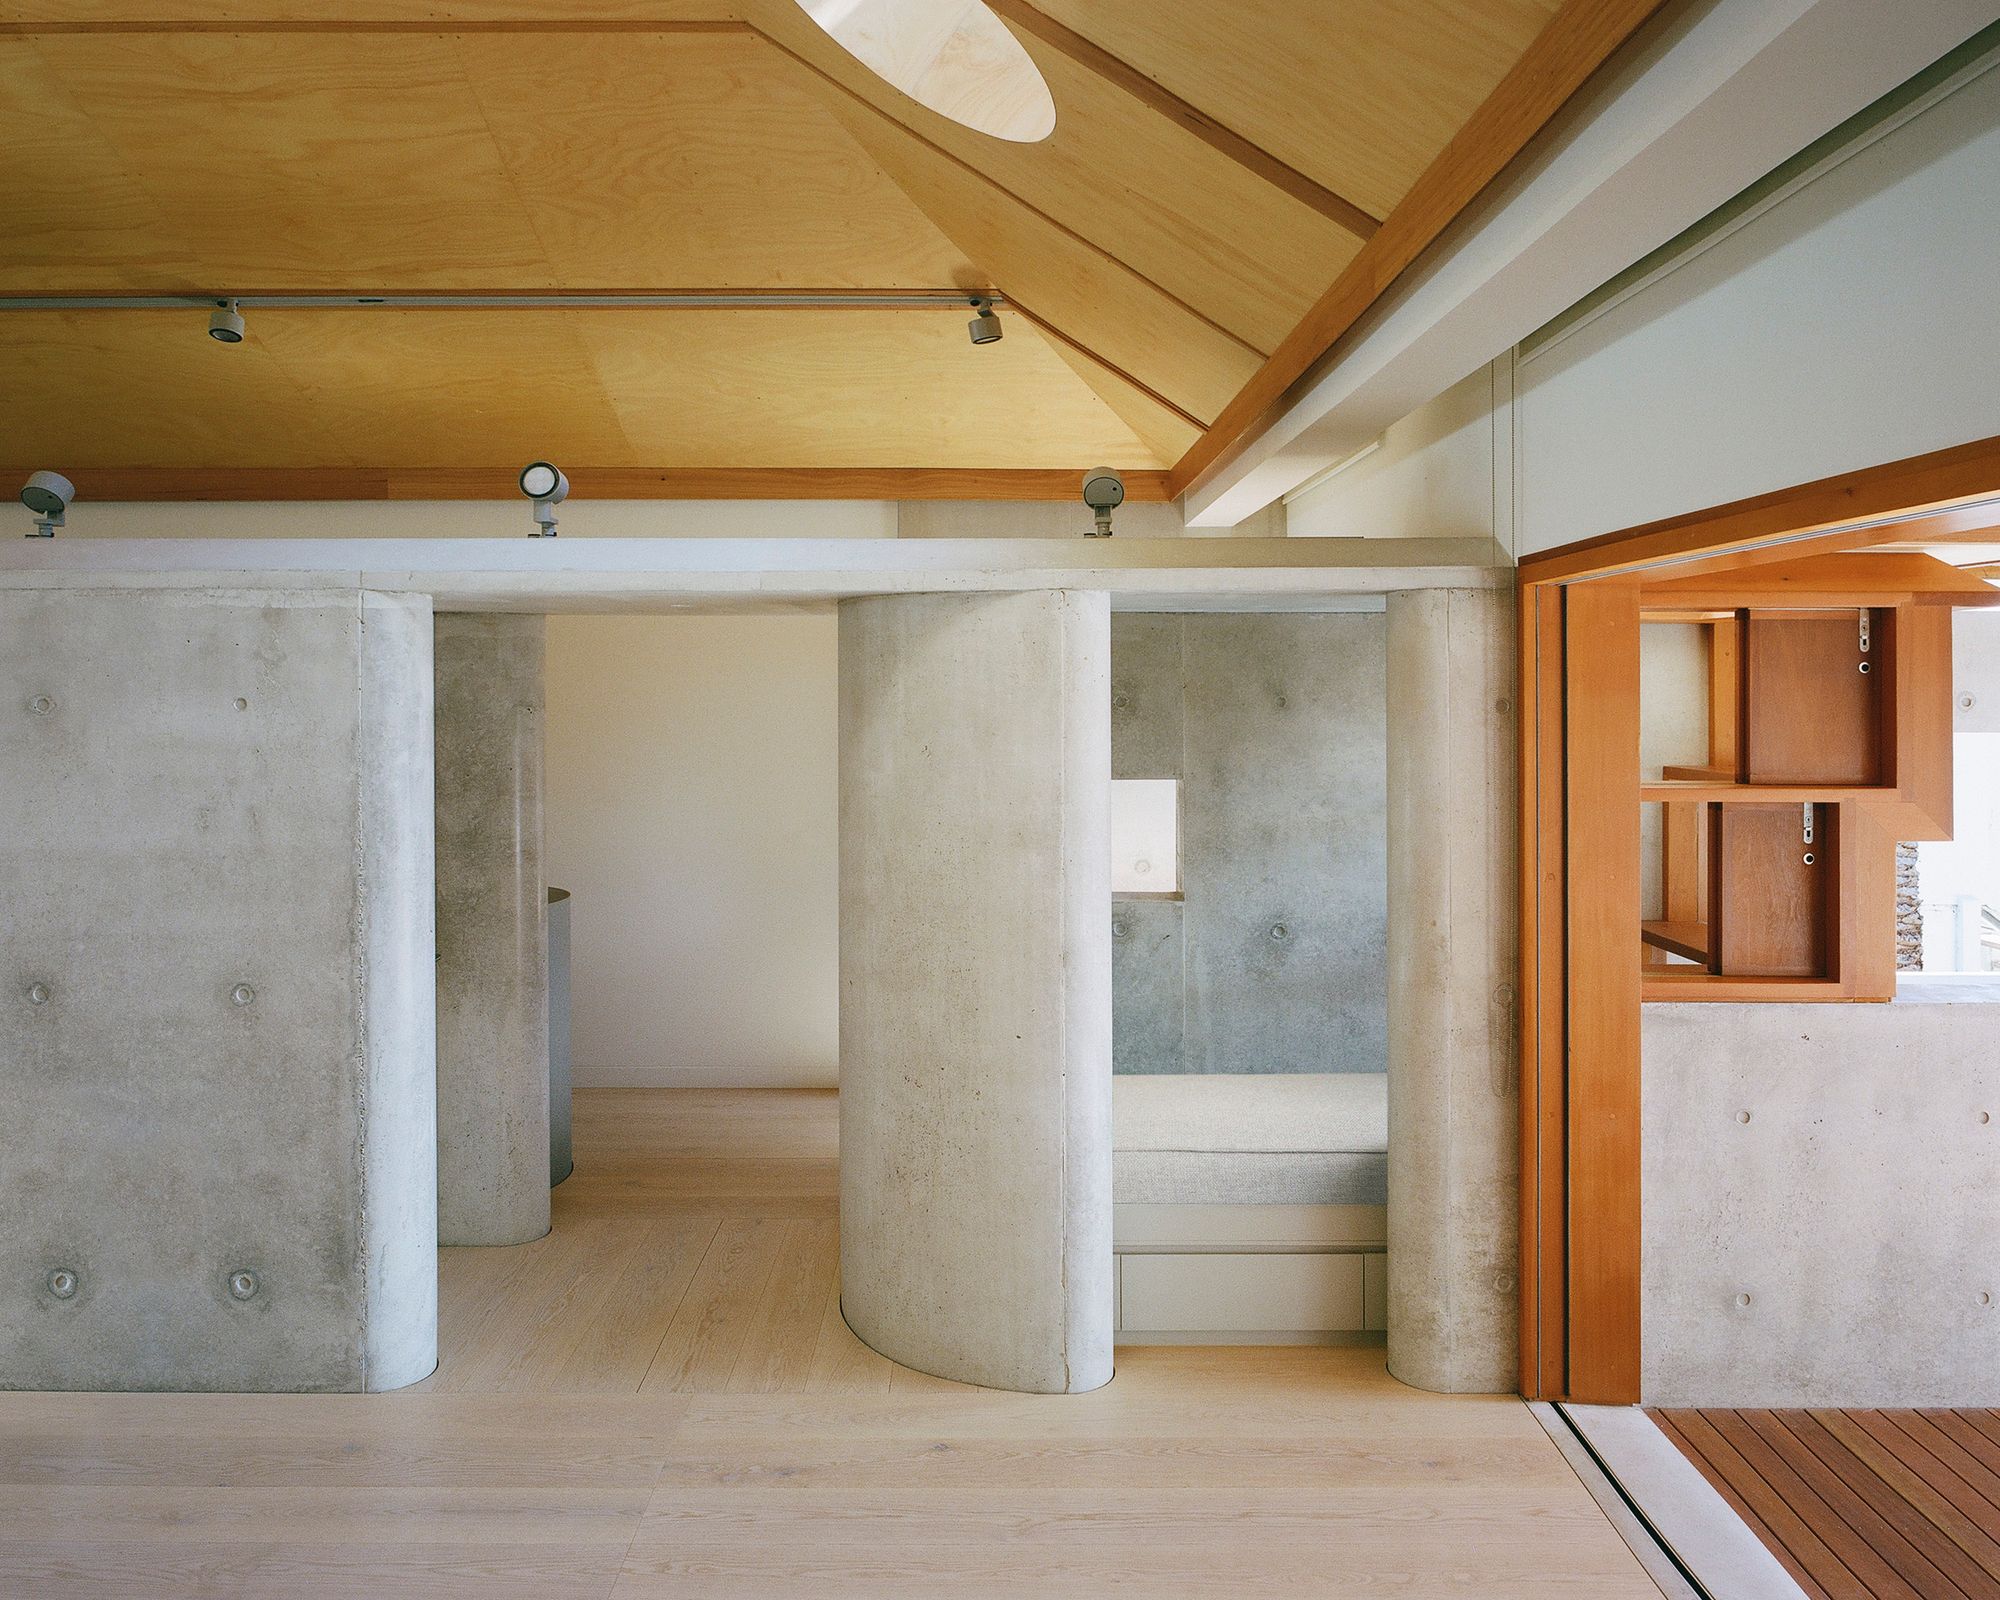 Lee House by Candalepas Associates. Interior,featuring the material composition of timber, and concrete.